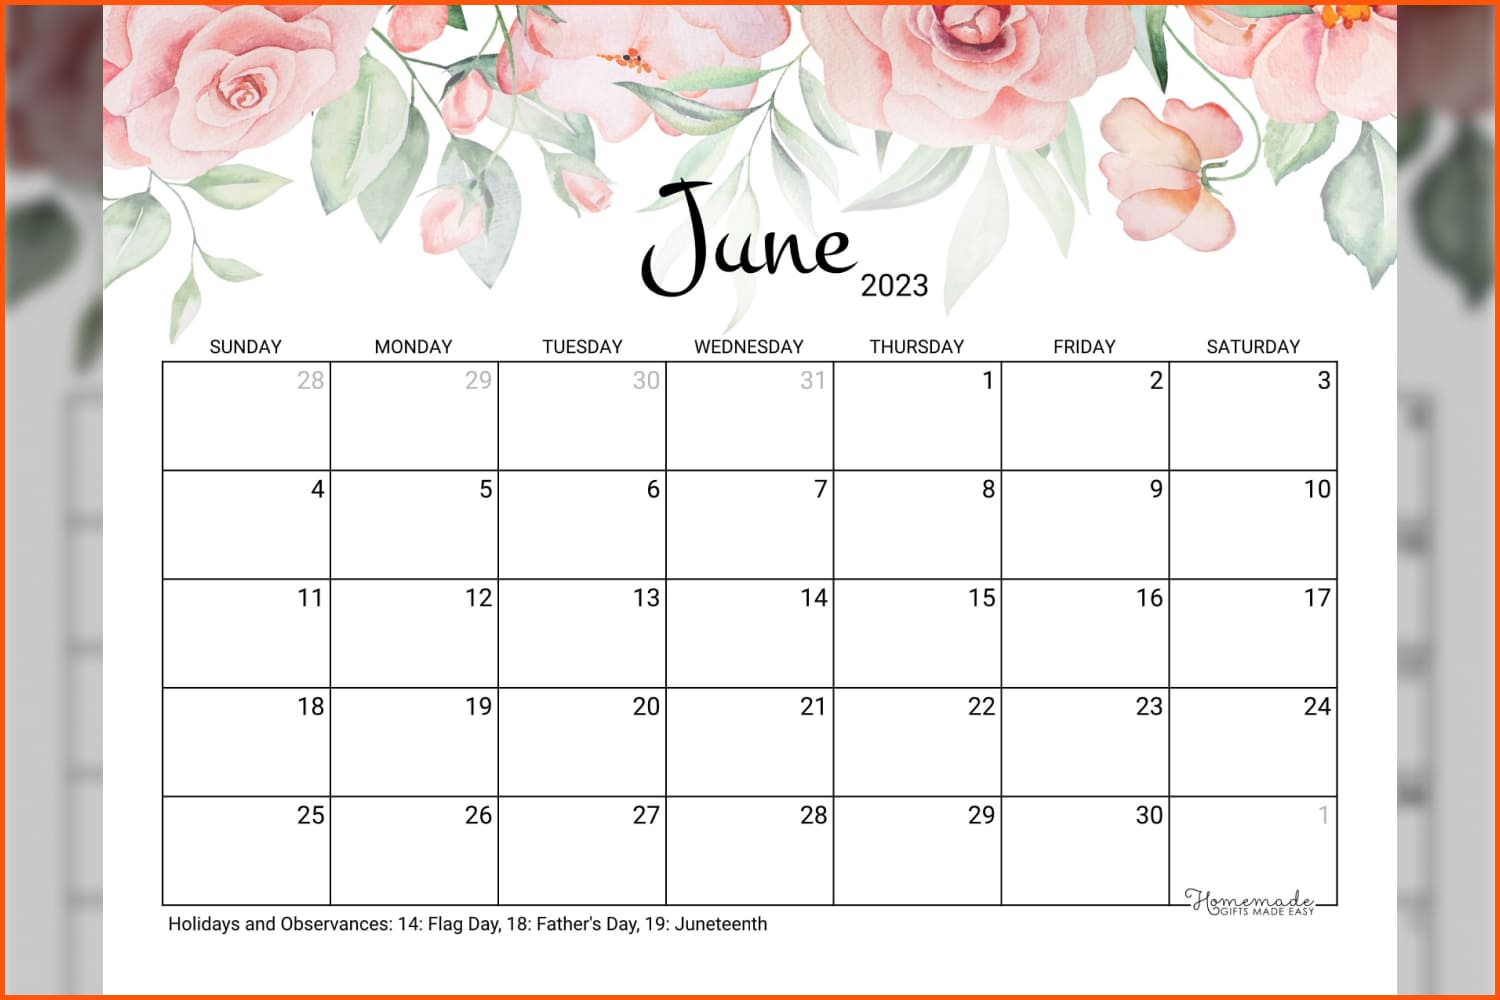 June calendar with holidays and drawings of roses.